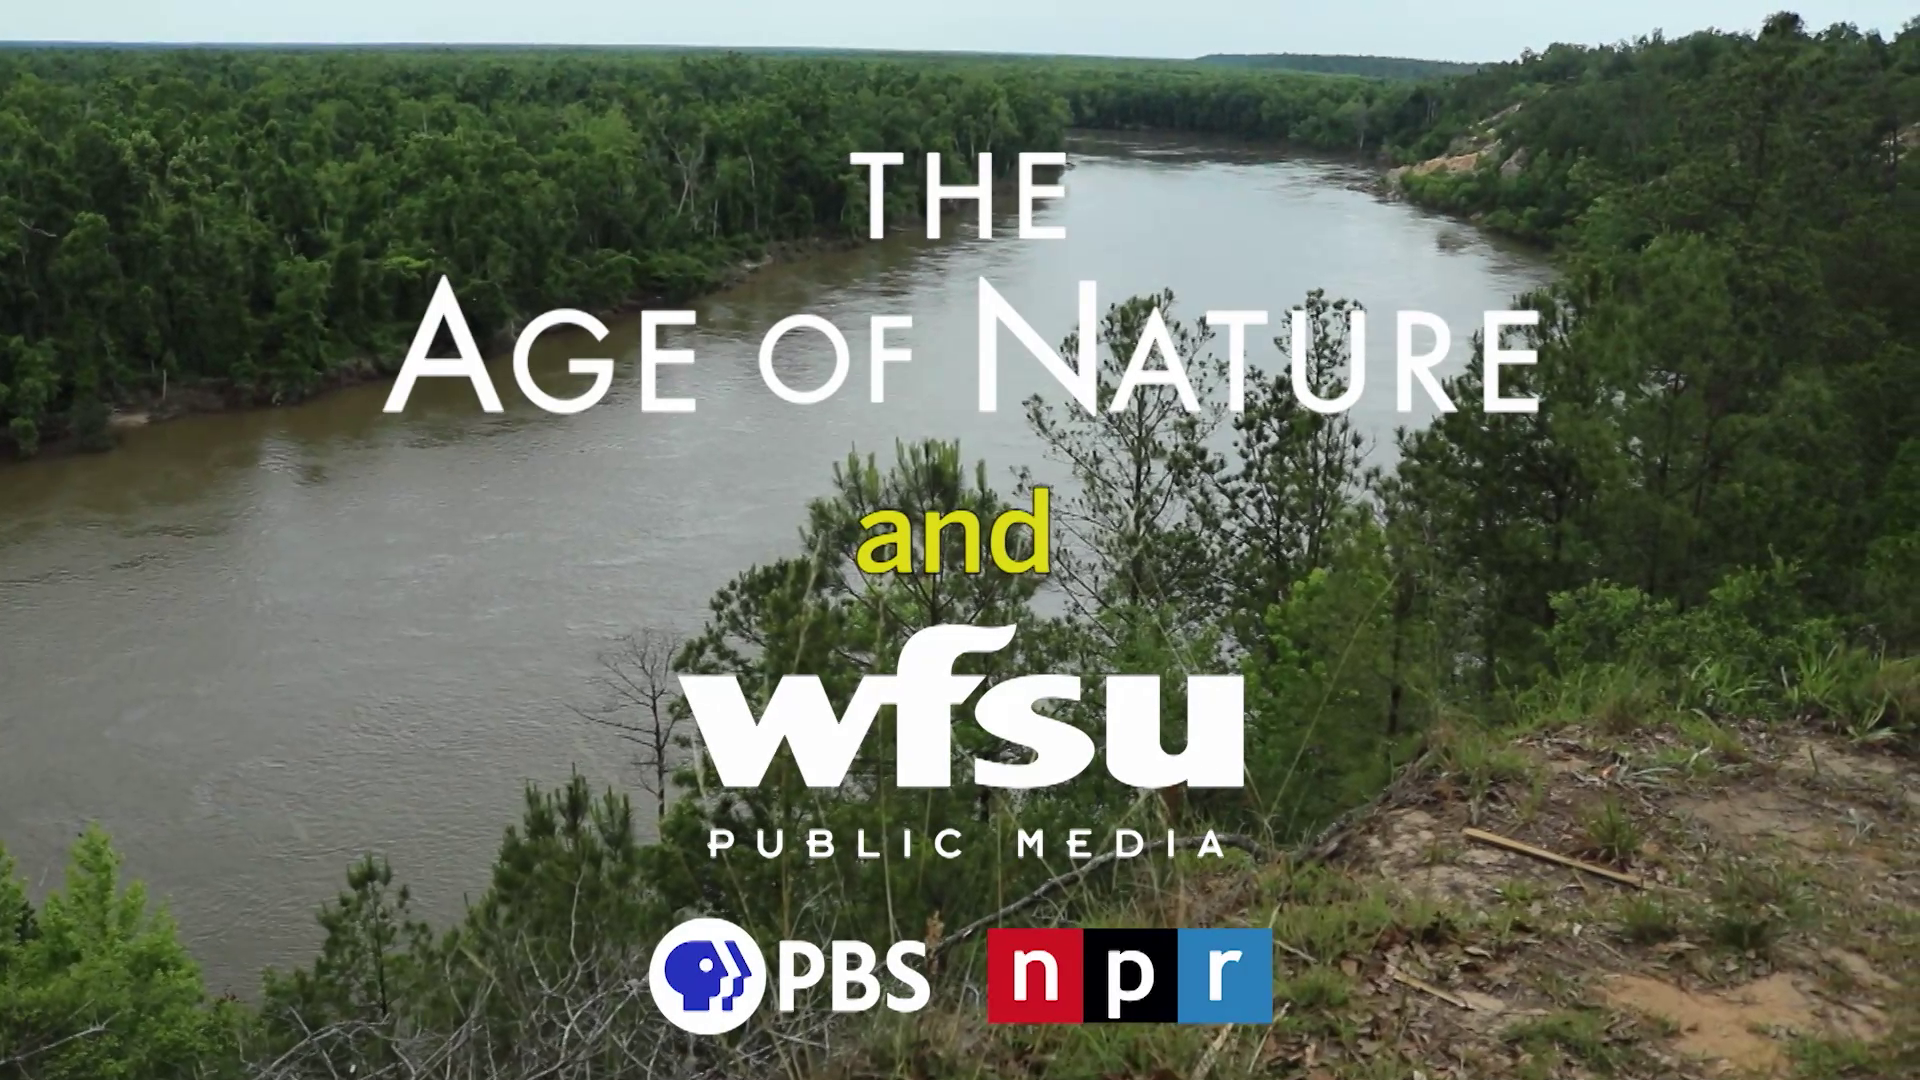 The Age of Nature and WFSU Recap